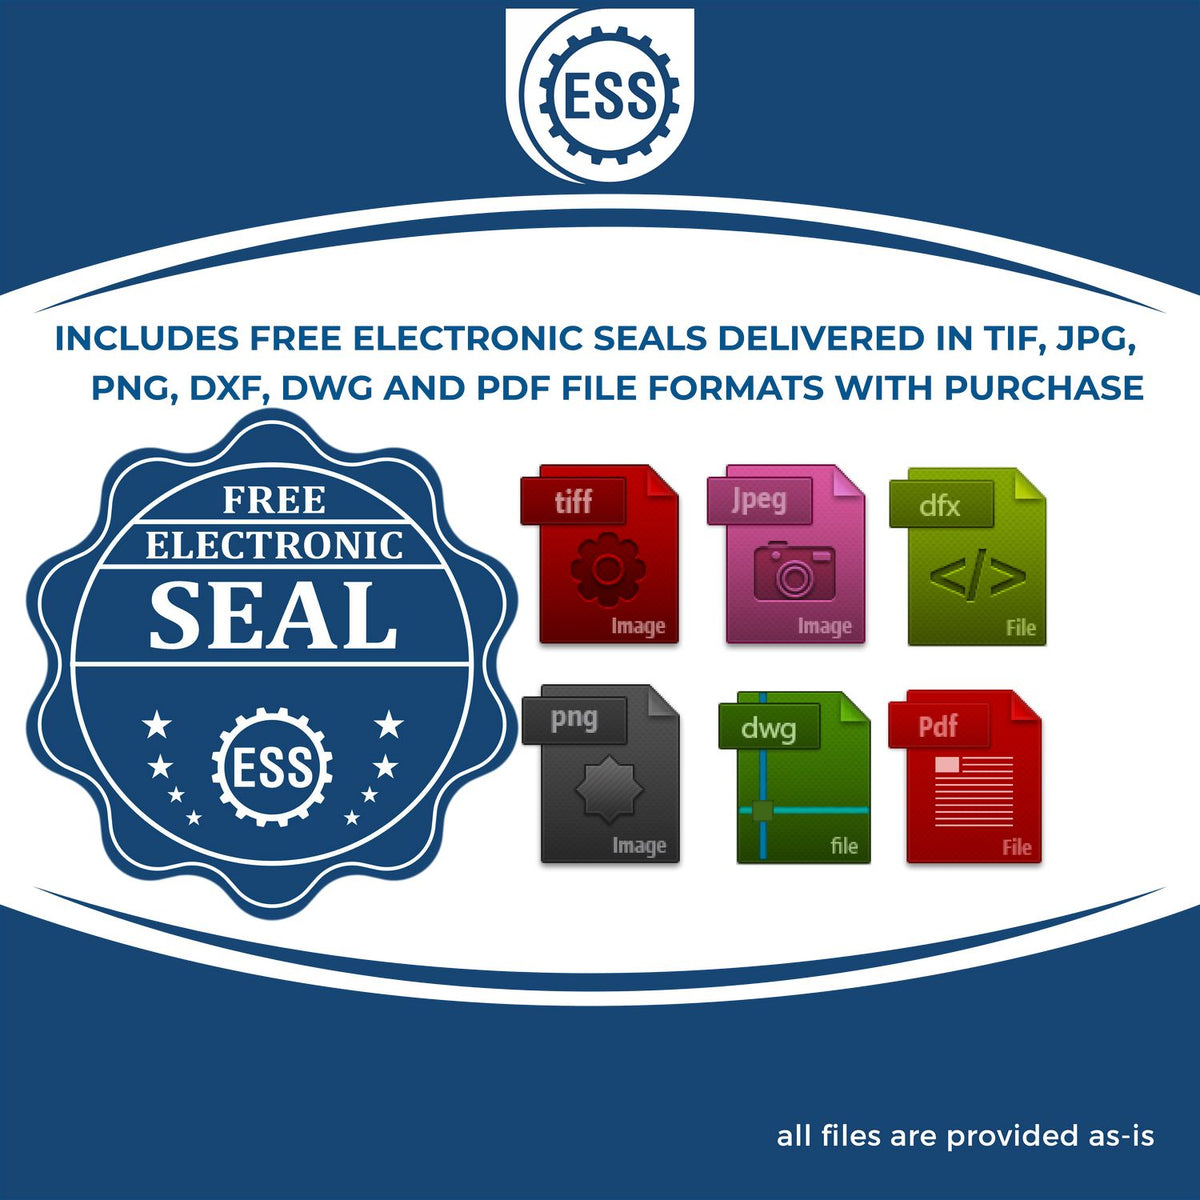 An infographic for the free electronic seal for the Handheld Maryland Professional Geologist Embosser illustrating the different file type icons such as DXF, DWG, TIF, JPG and PNG.